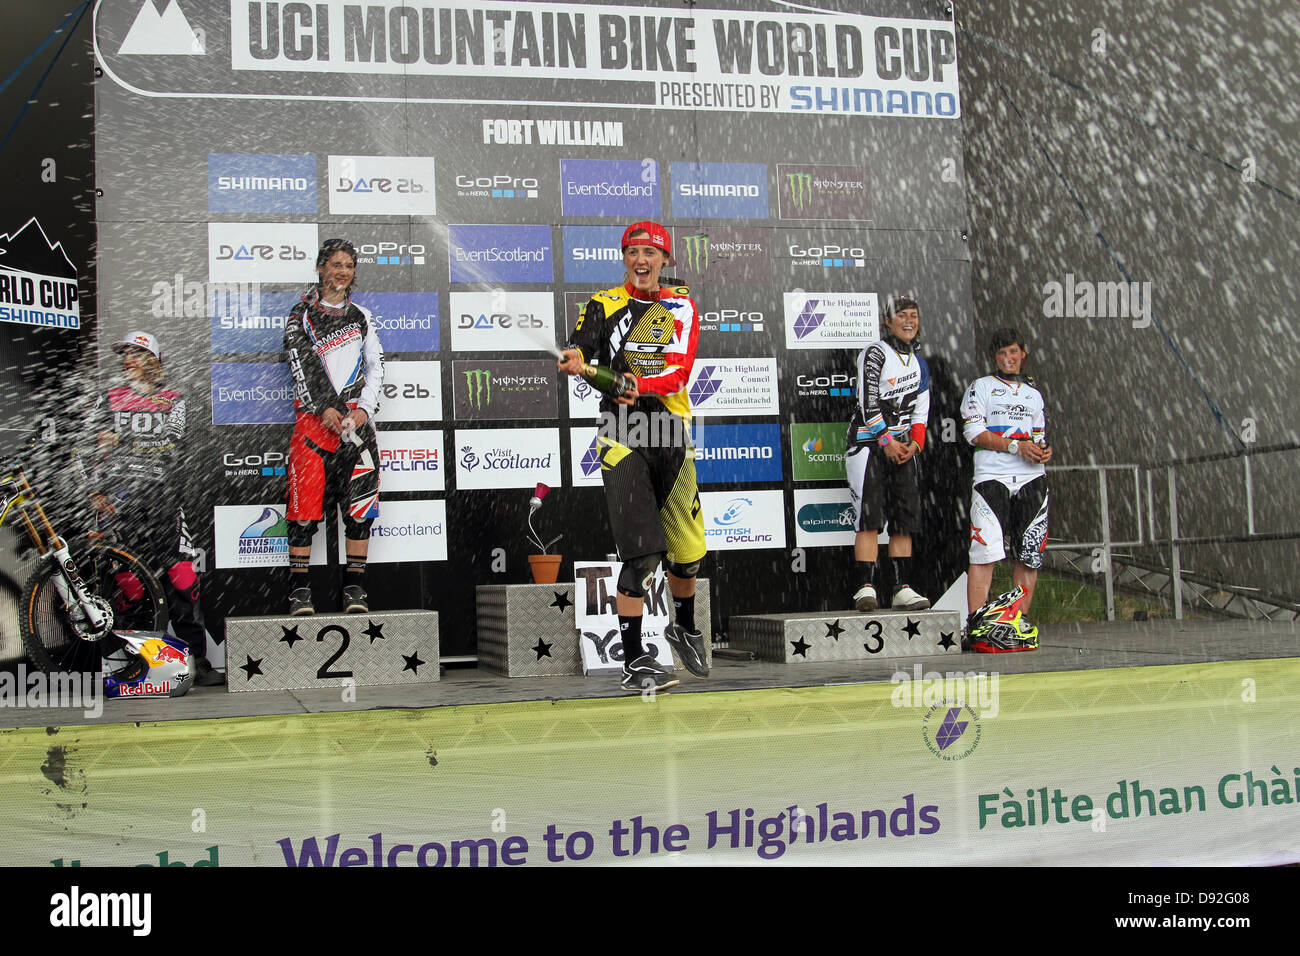 Winner of the 1st round of the Downhill Mountain Bike World Cup, Rachel Atherton, spraying champagne in celebration at Fort William. Stock Photo